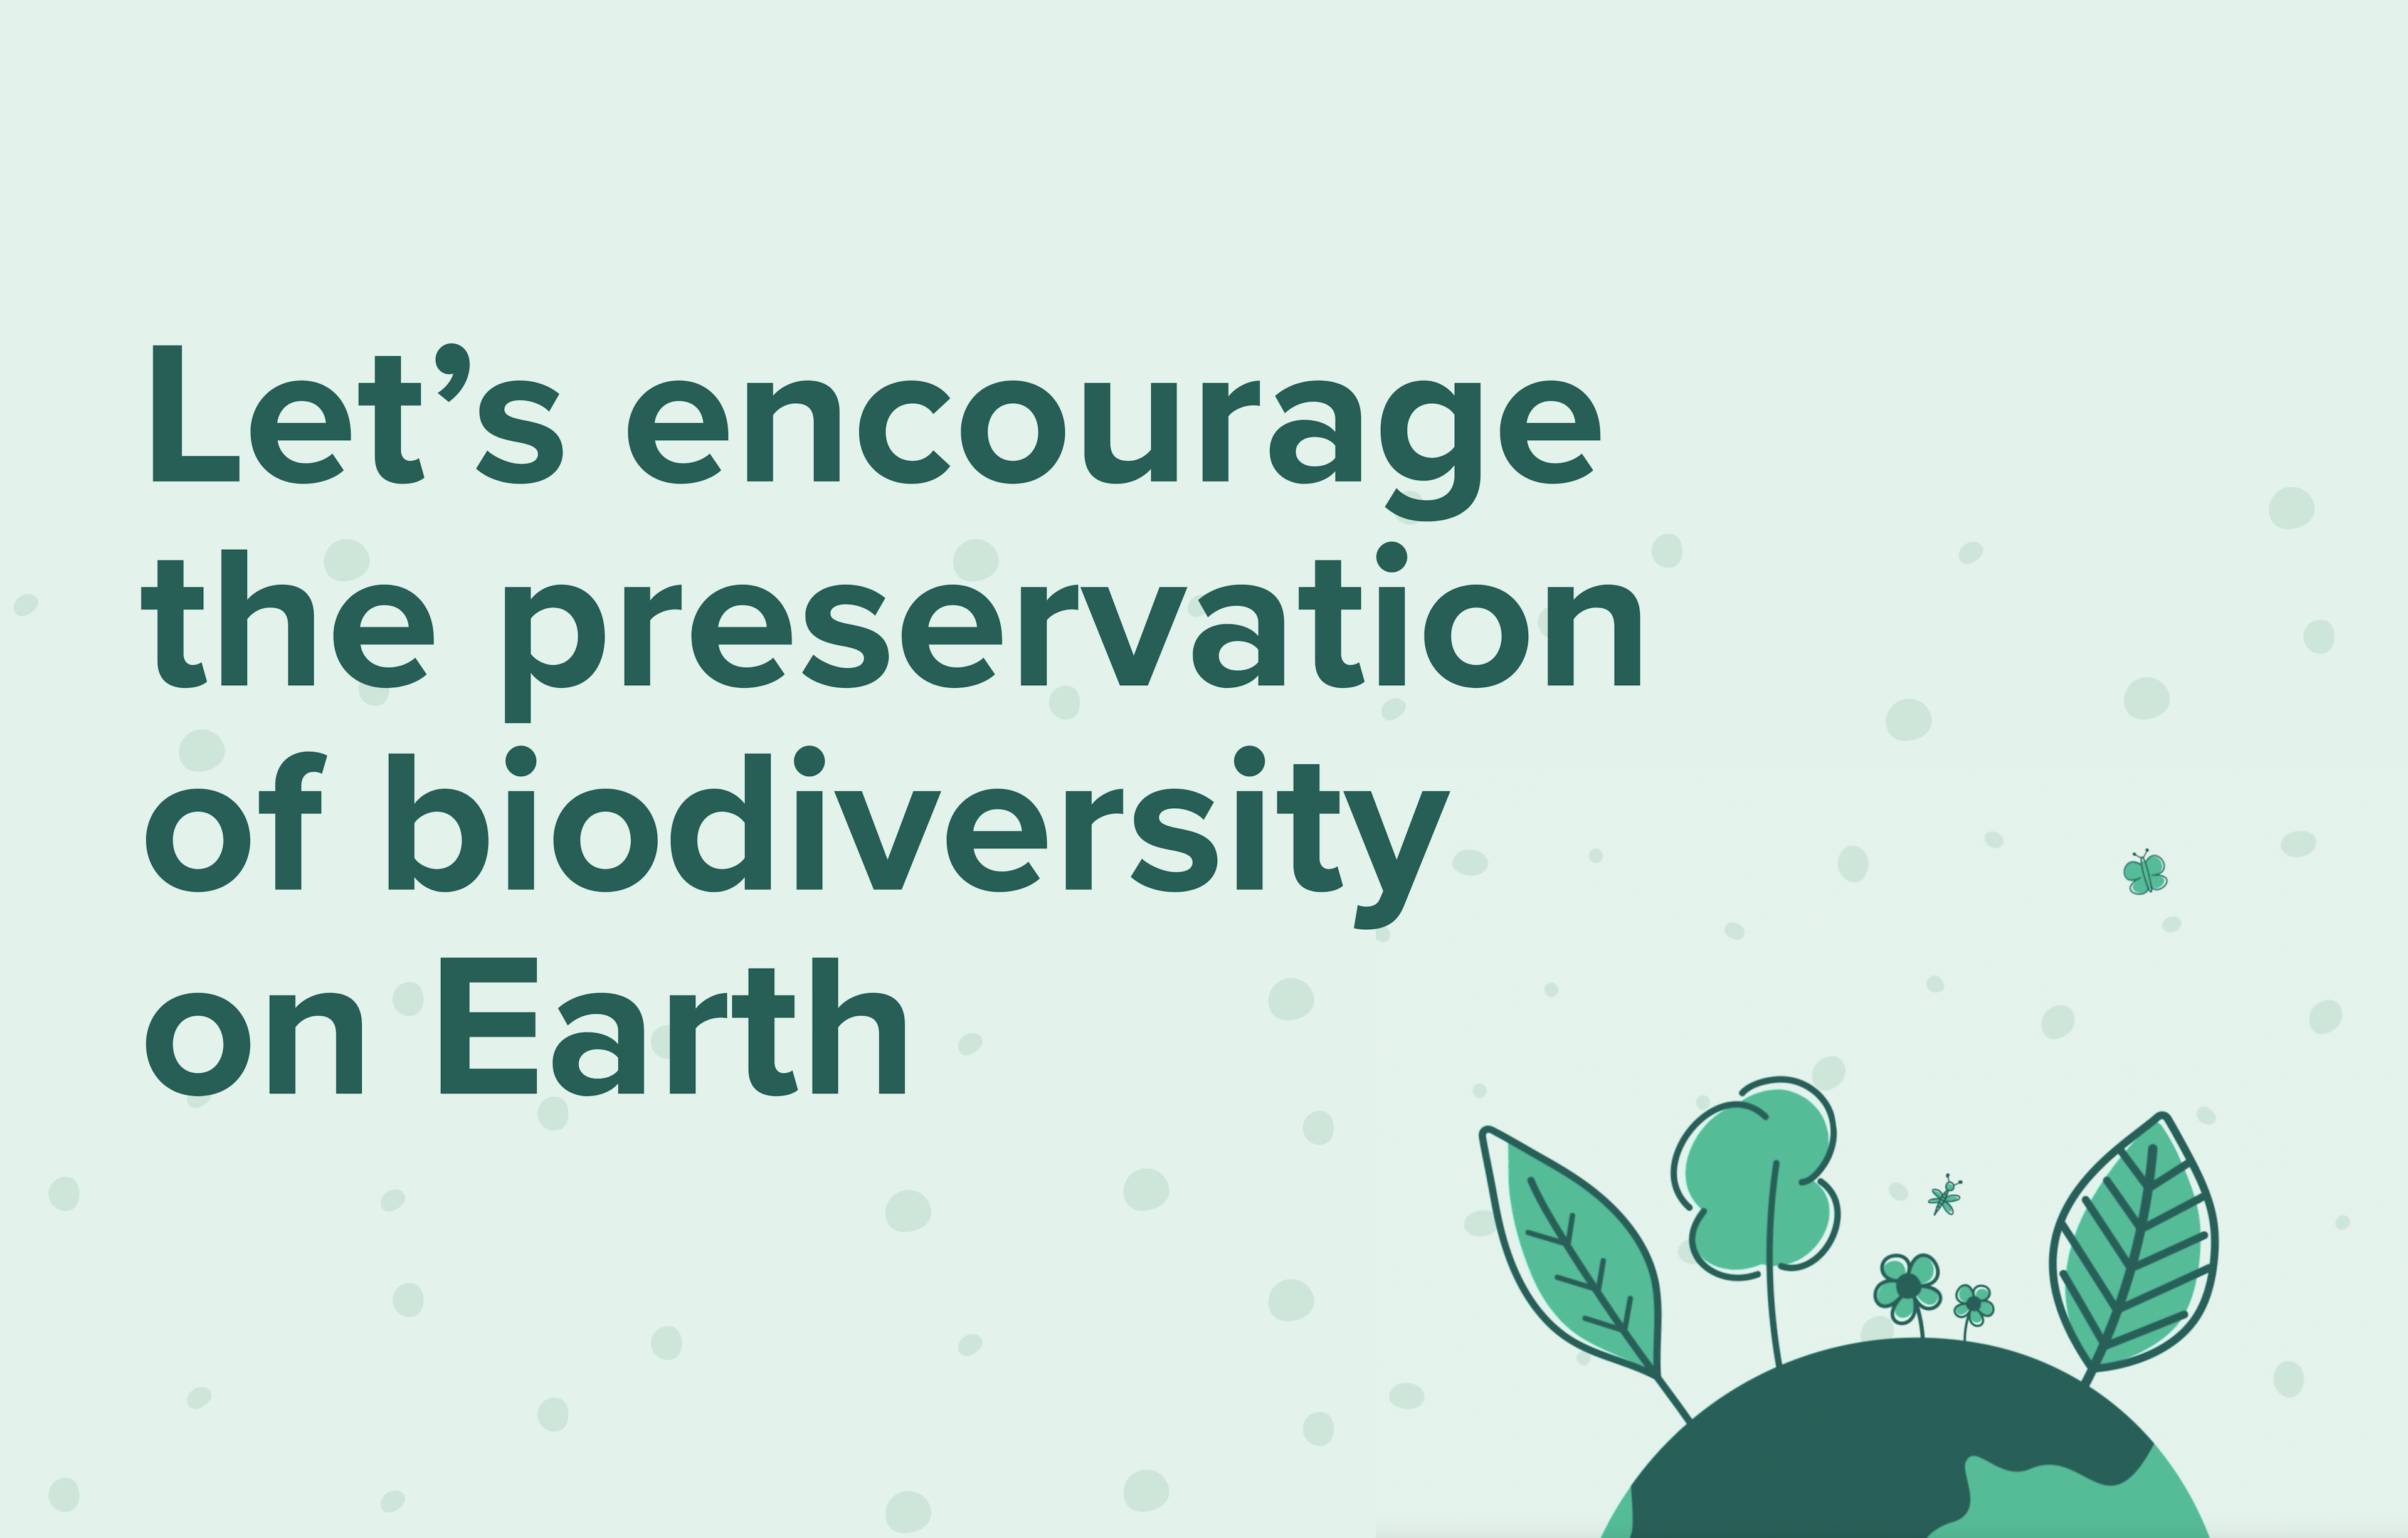  Let's encourage the preservation of biodiversity on Earth